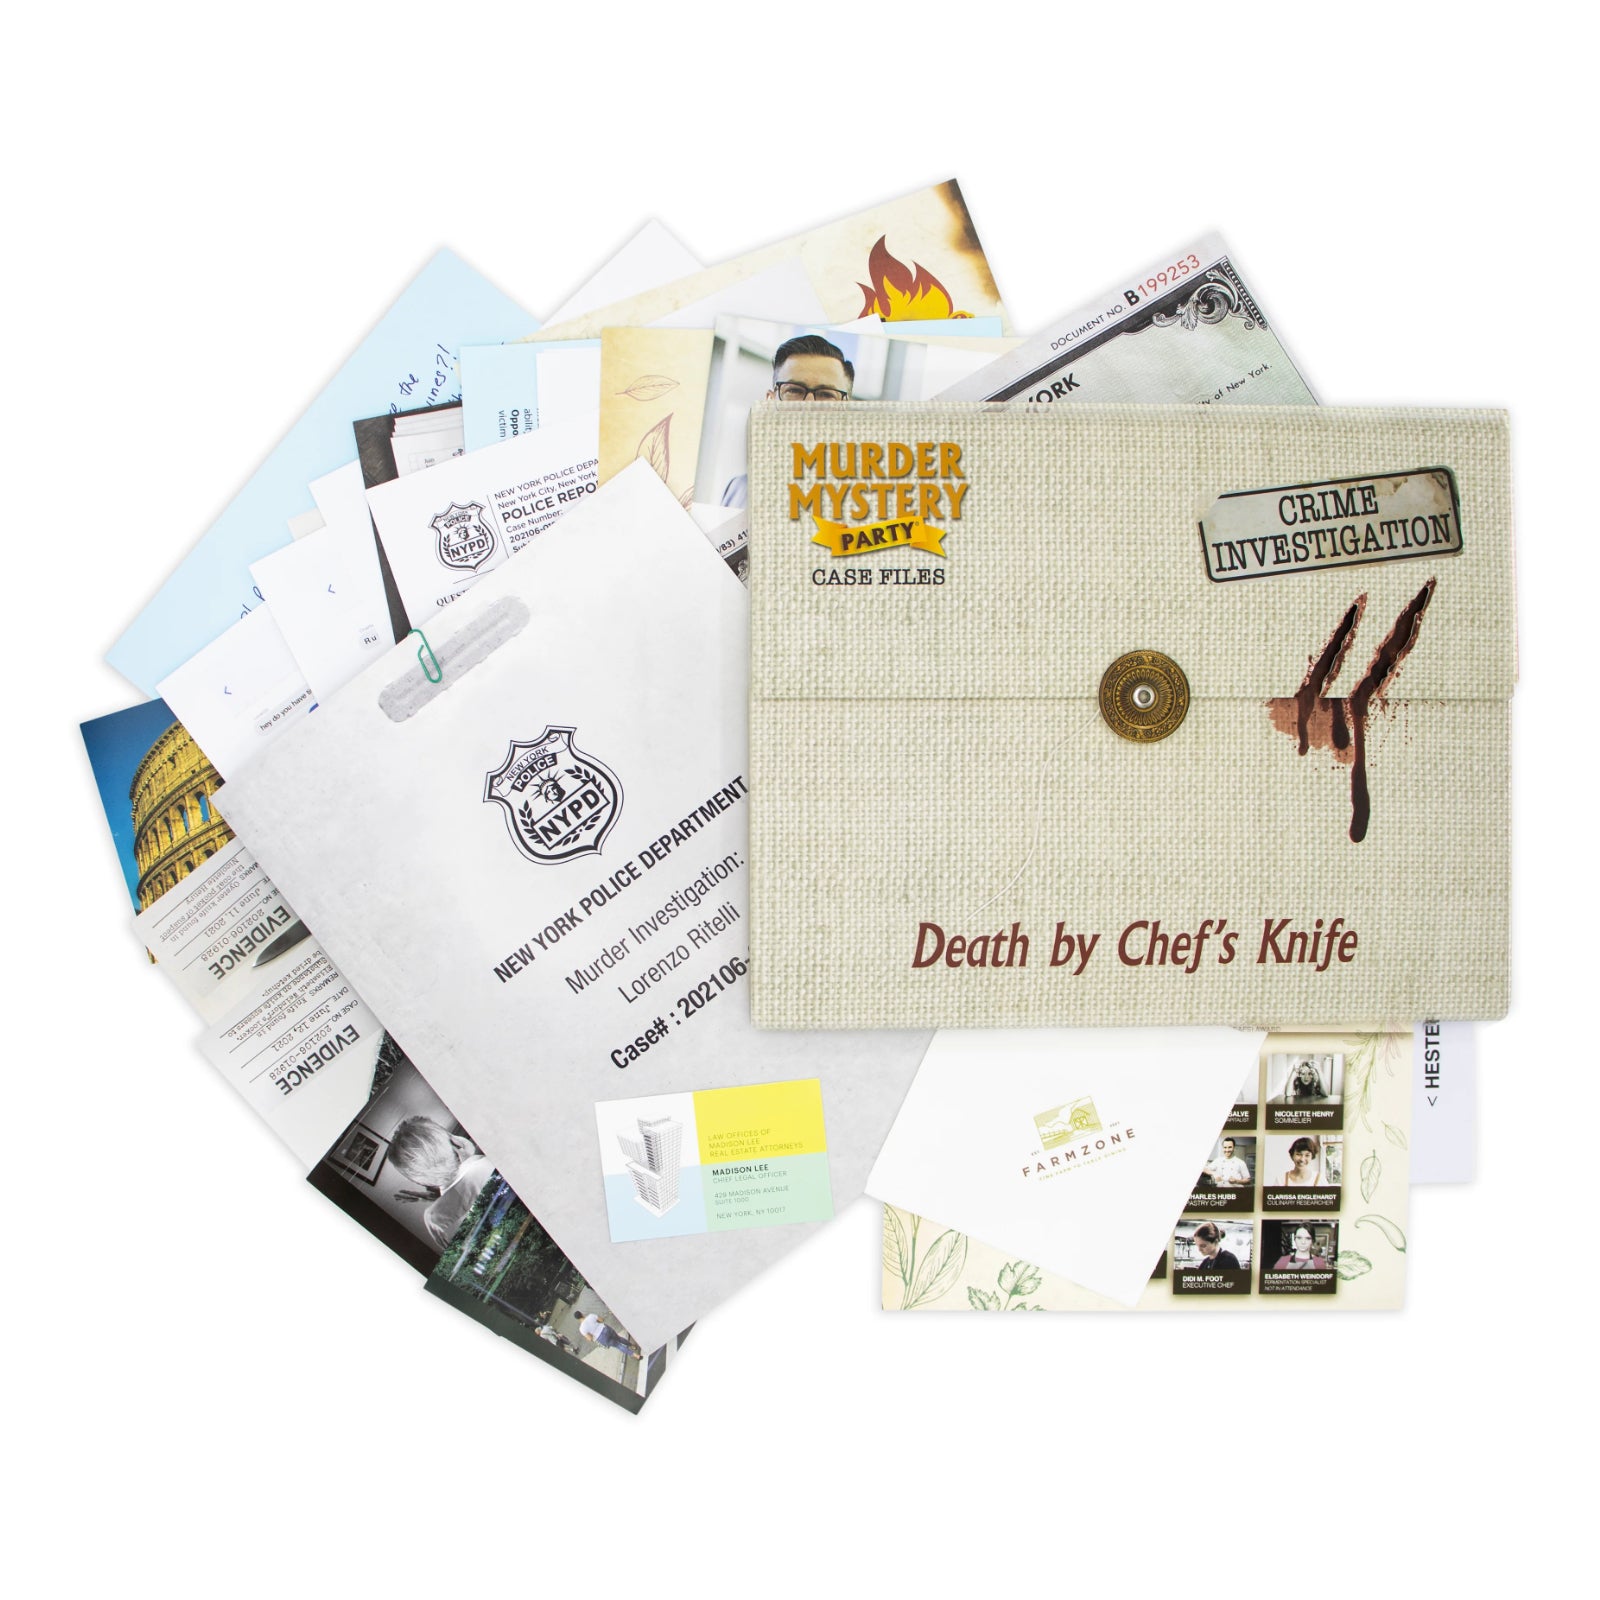 Detective Stories - Death by Chef's Knife - Case Files